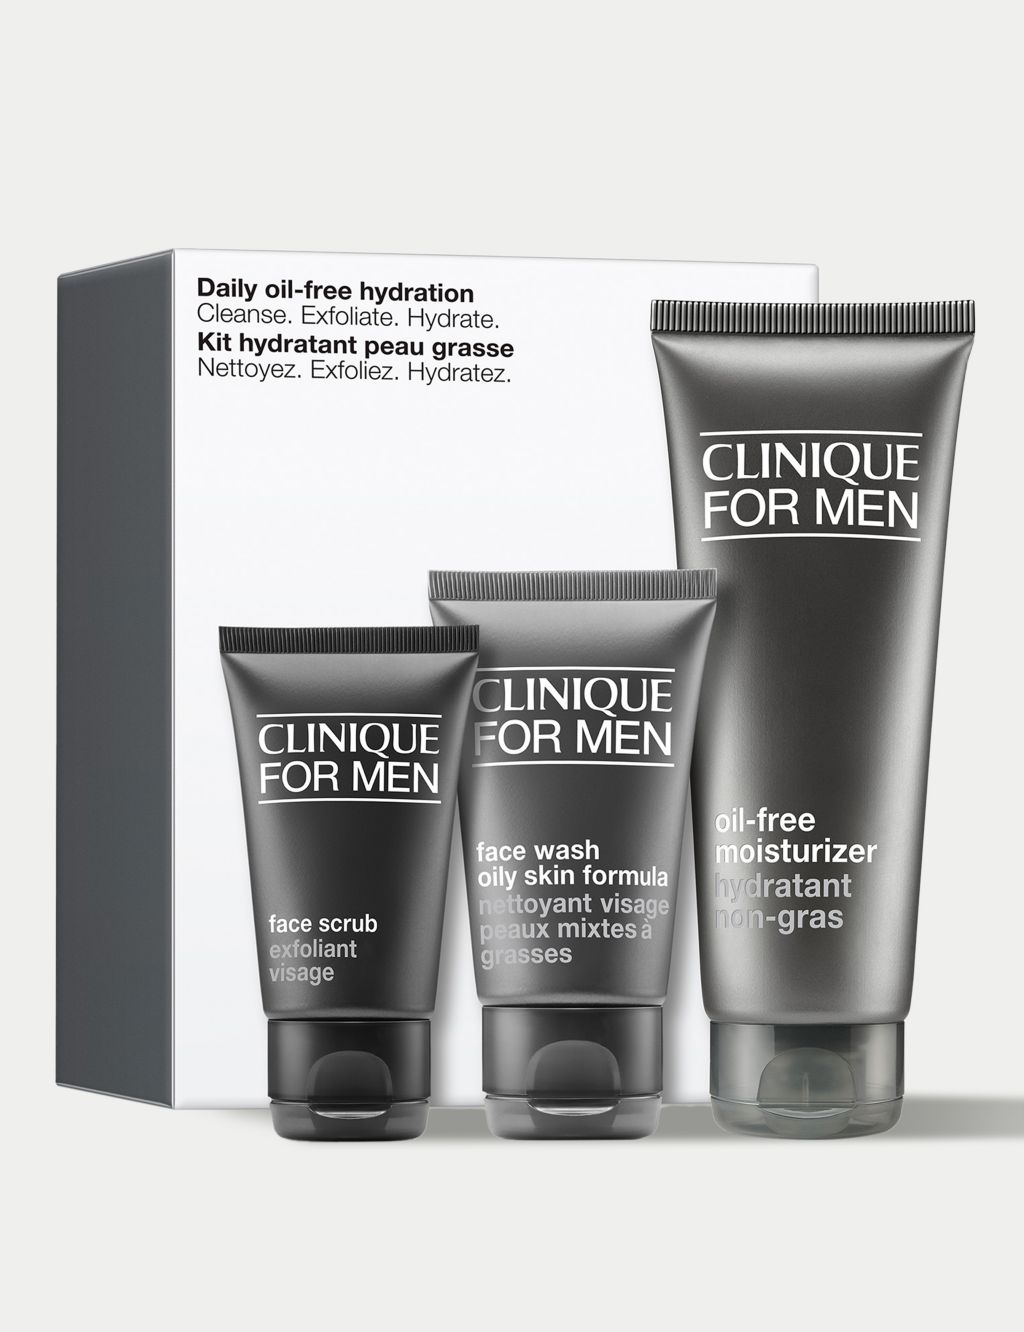 Daily Oil-Free Hydration Skincare Gift Set for Men